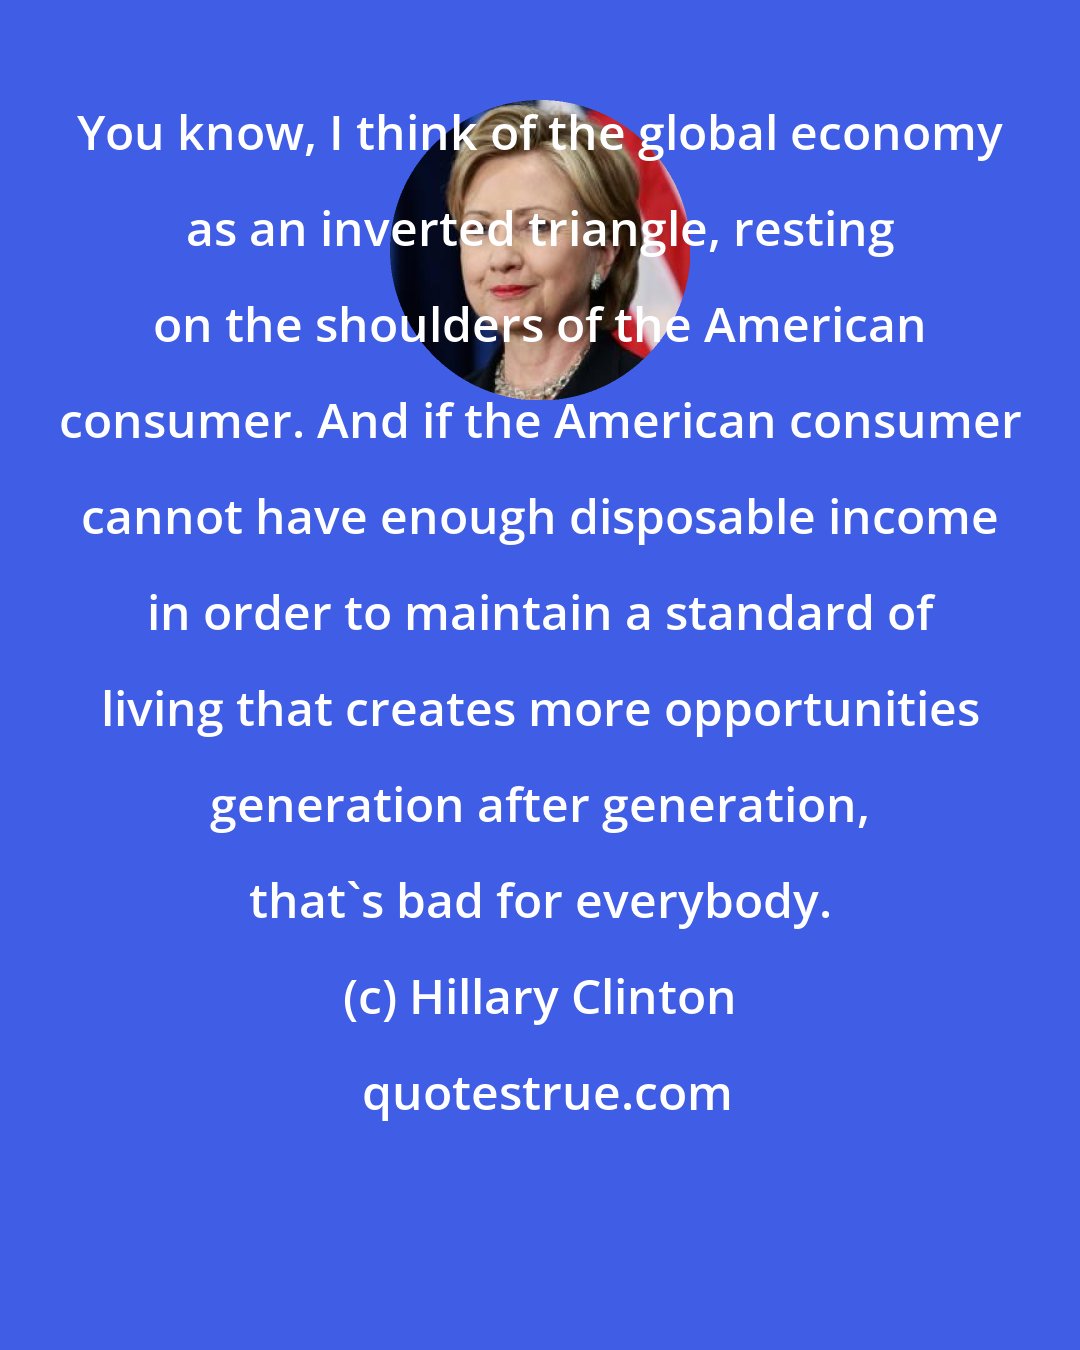 Hillary Clinton: You know, I think of the global economy as an inverted triangle, resting on the shoulders of the American consumer. And if the American consumer cannot have enough disposable income in order to maintain a standard of living that creates more opportunities generation after generation, that's bad for everybody.